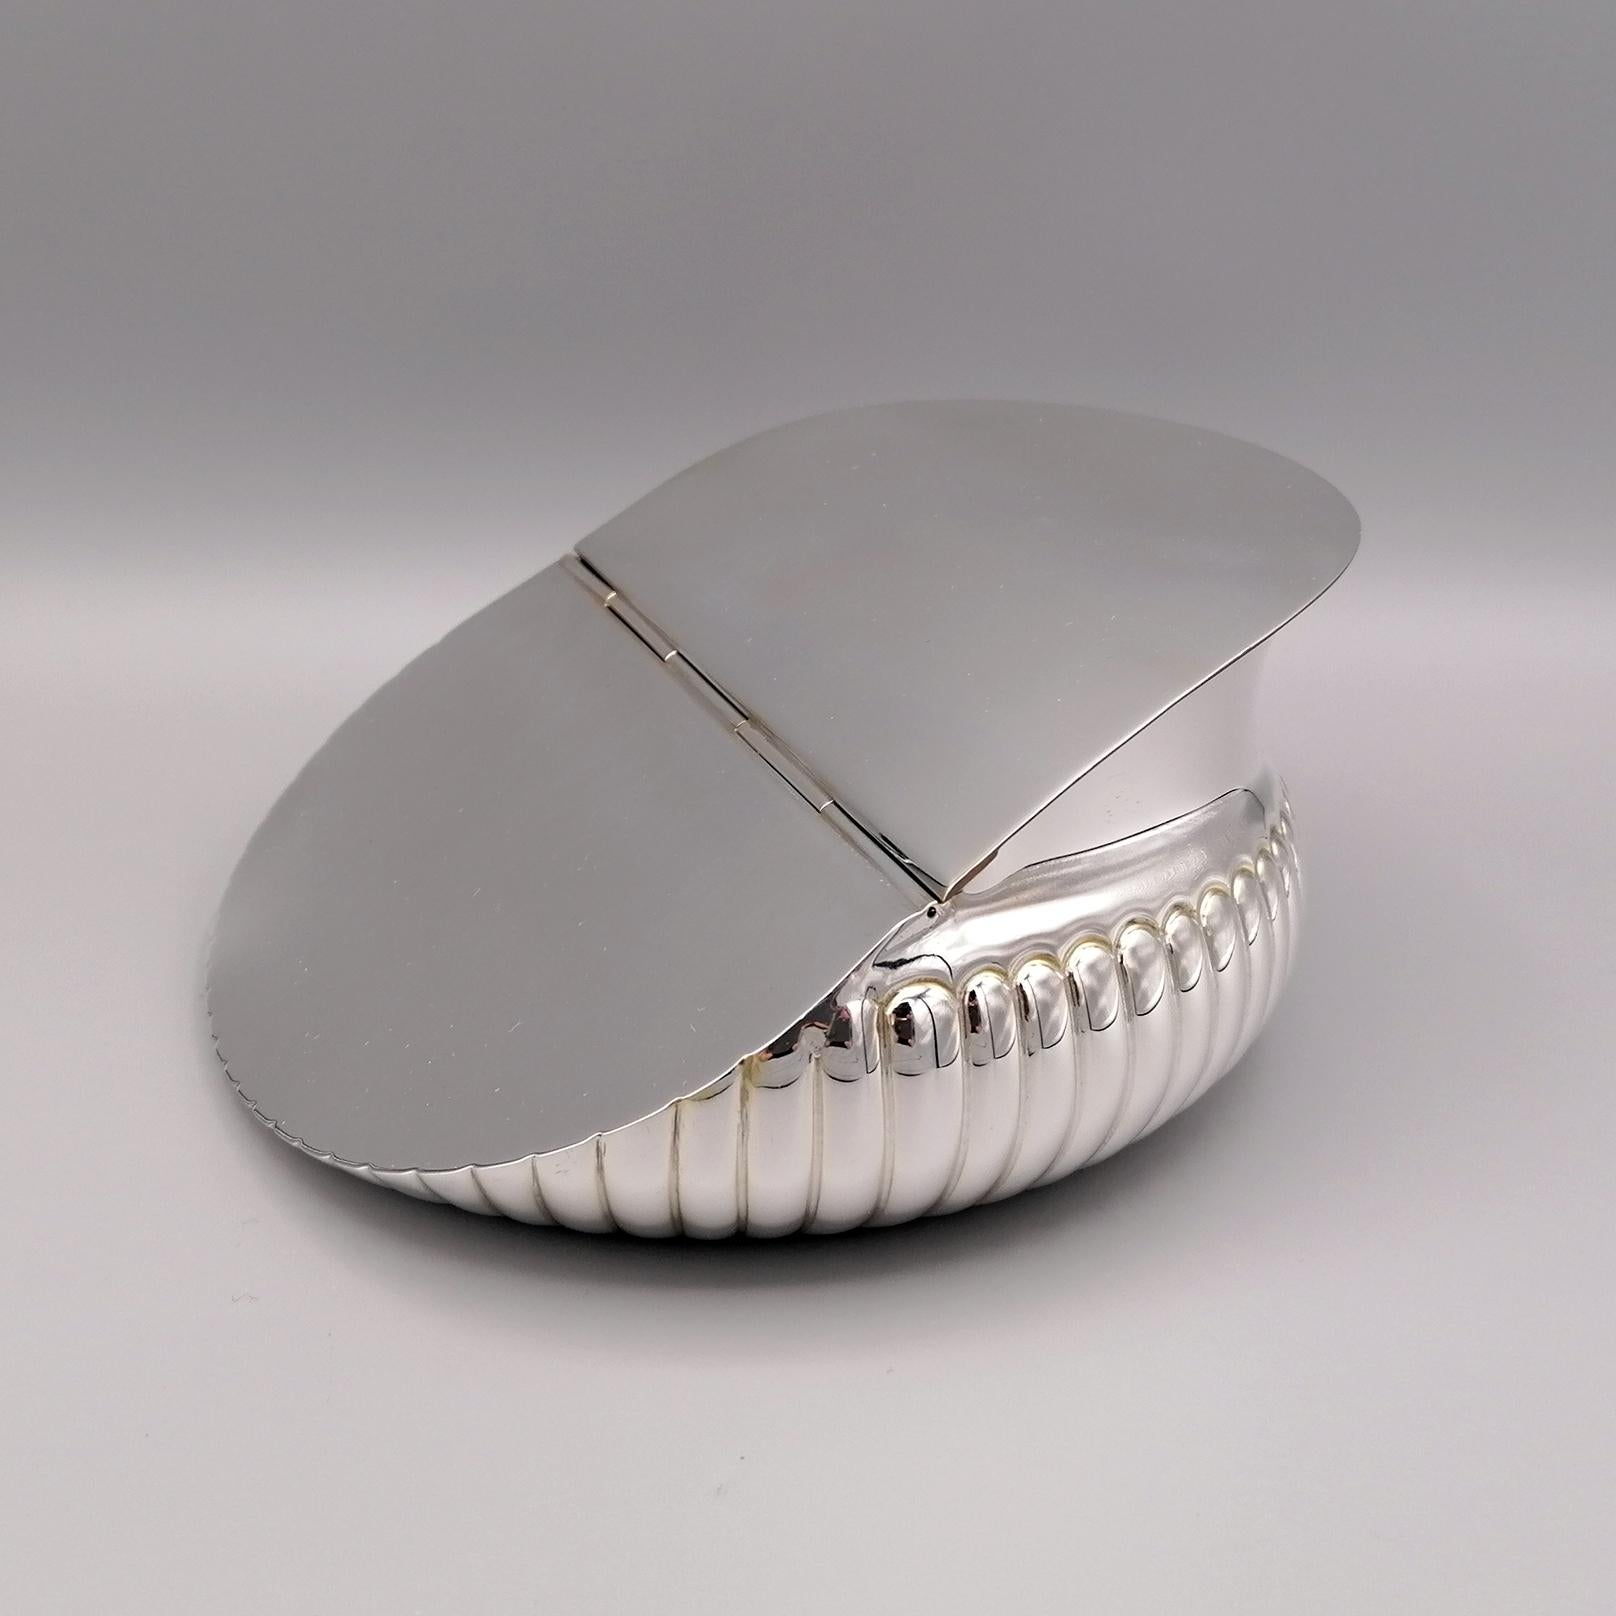 Completely handmade solid sterling silver decorative box of oblique shape. 
The lower part of the body has fluted embossed and chiseled
The smooth, glossy lid is hinged in the center.
Italian silverware, already with a centuries-old tradition, had a